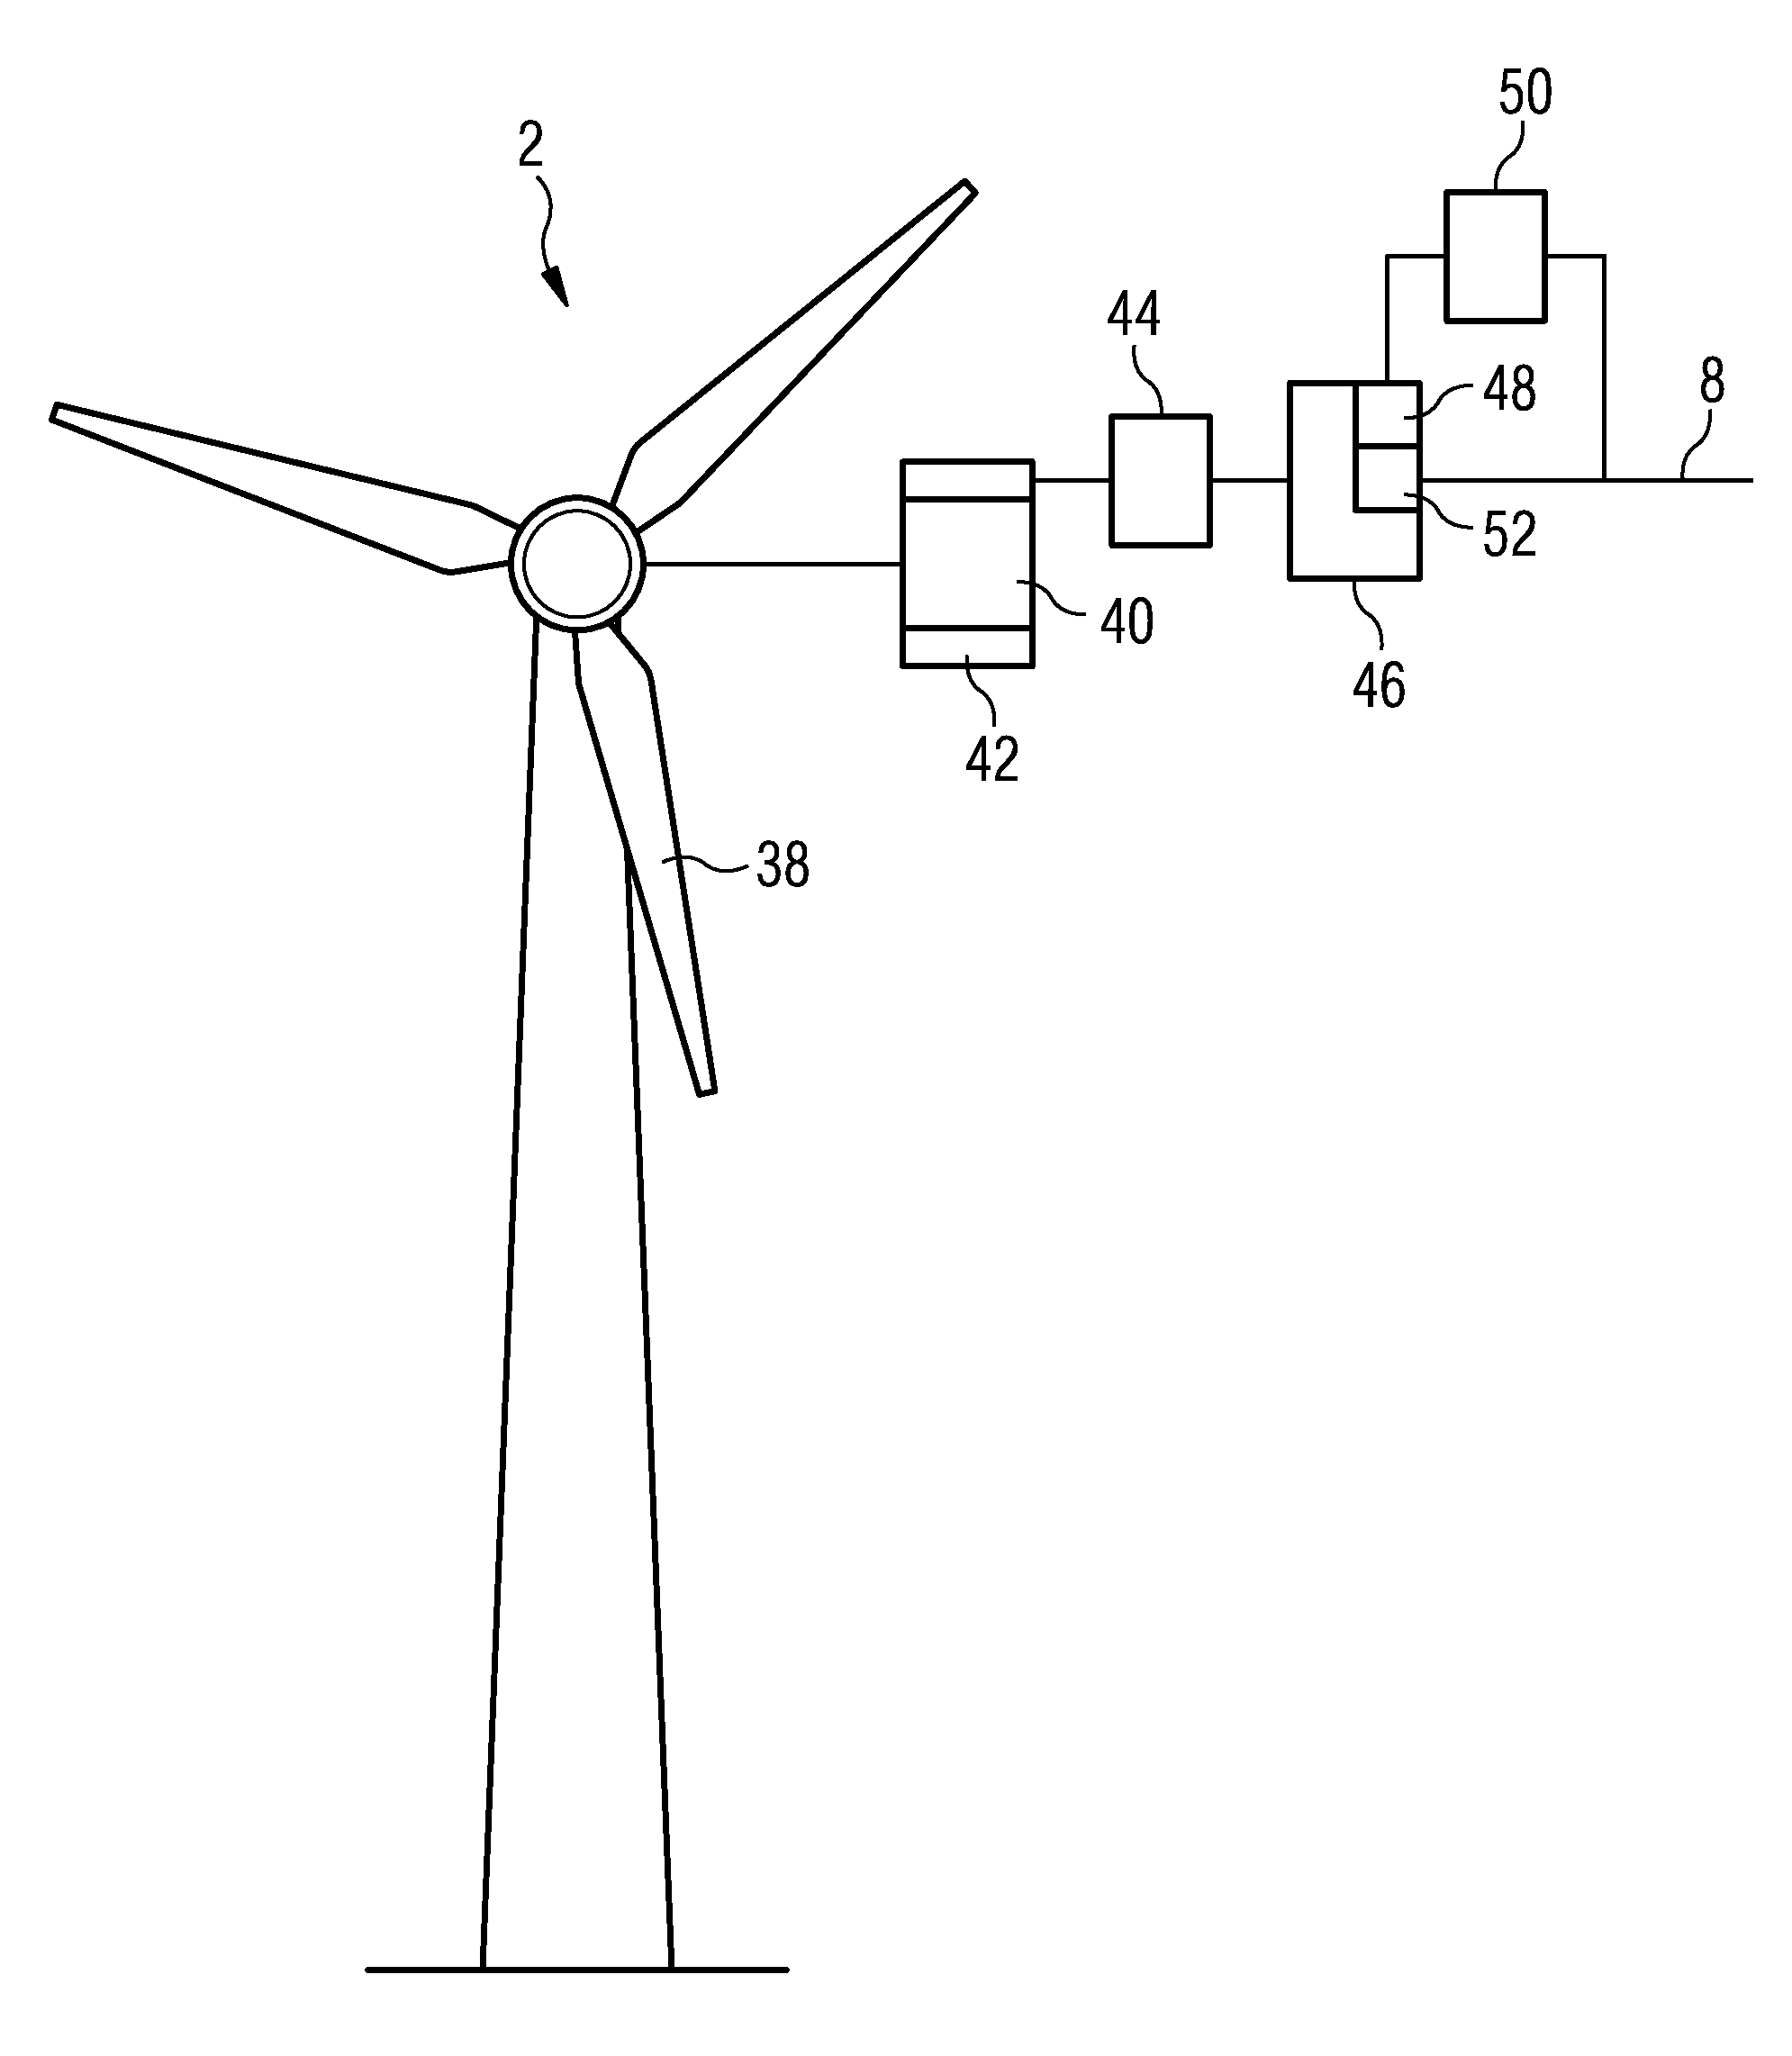 Fault-ride-through method, converter and power generating unit for a wind turbine